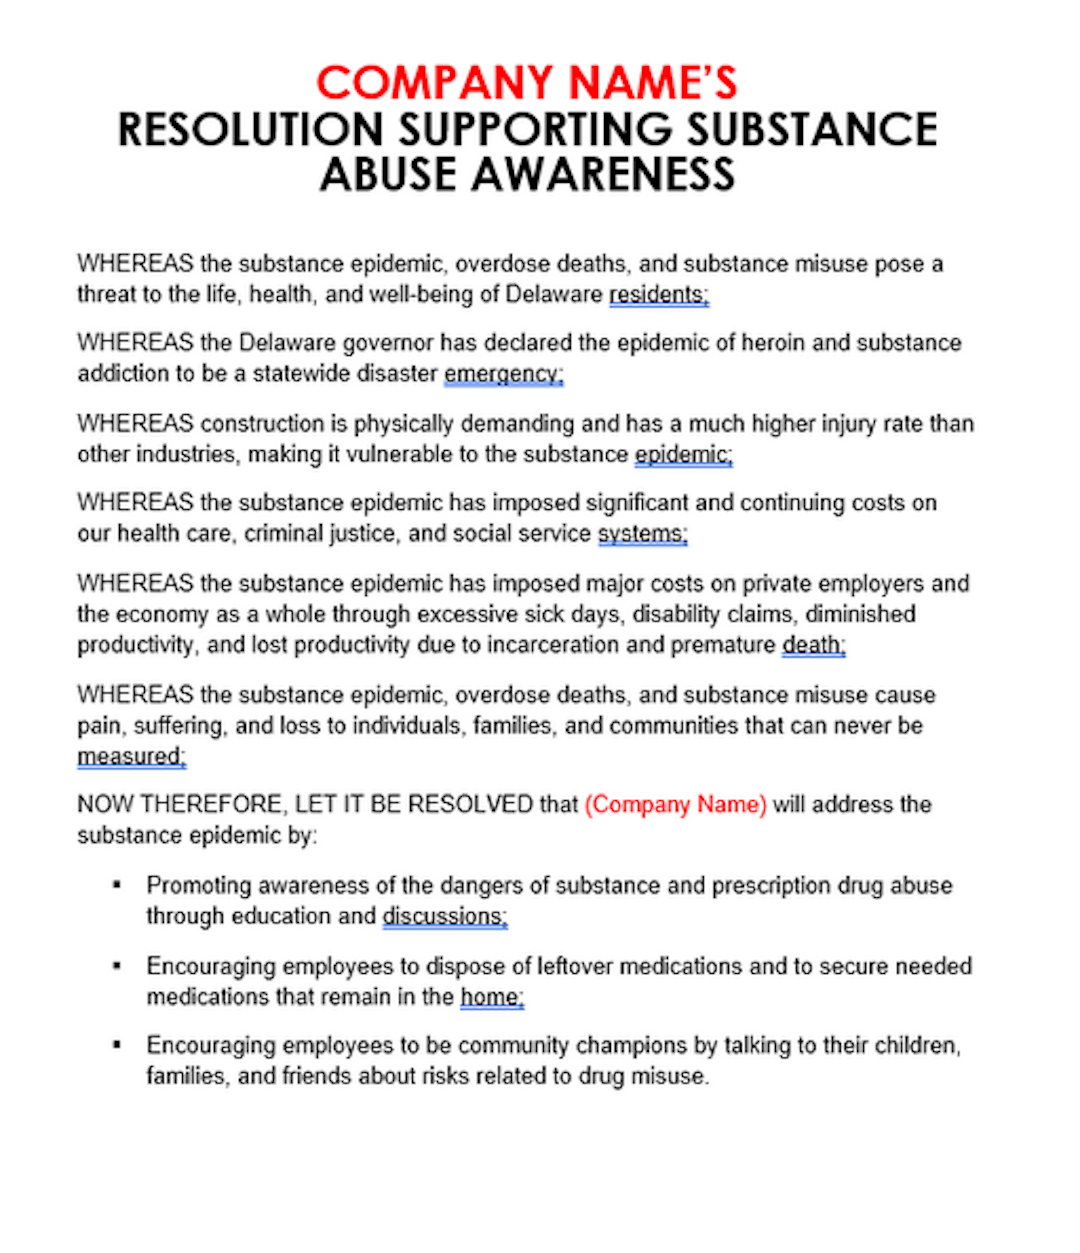 Customizable Employer Resolution Supporting Substance Abuse Awareness